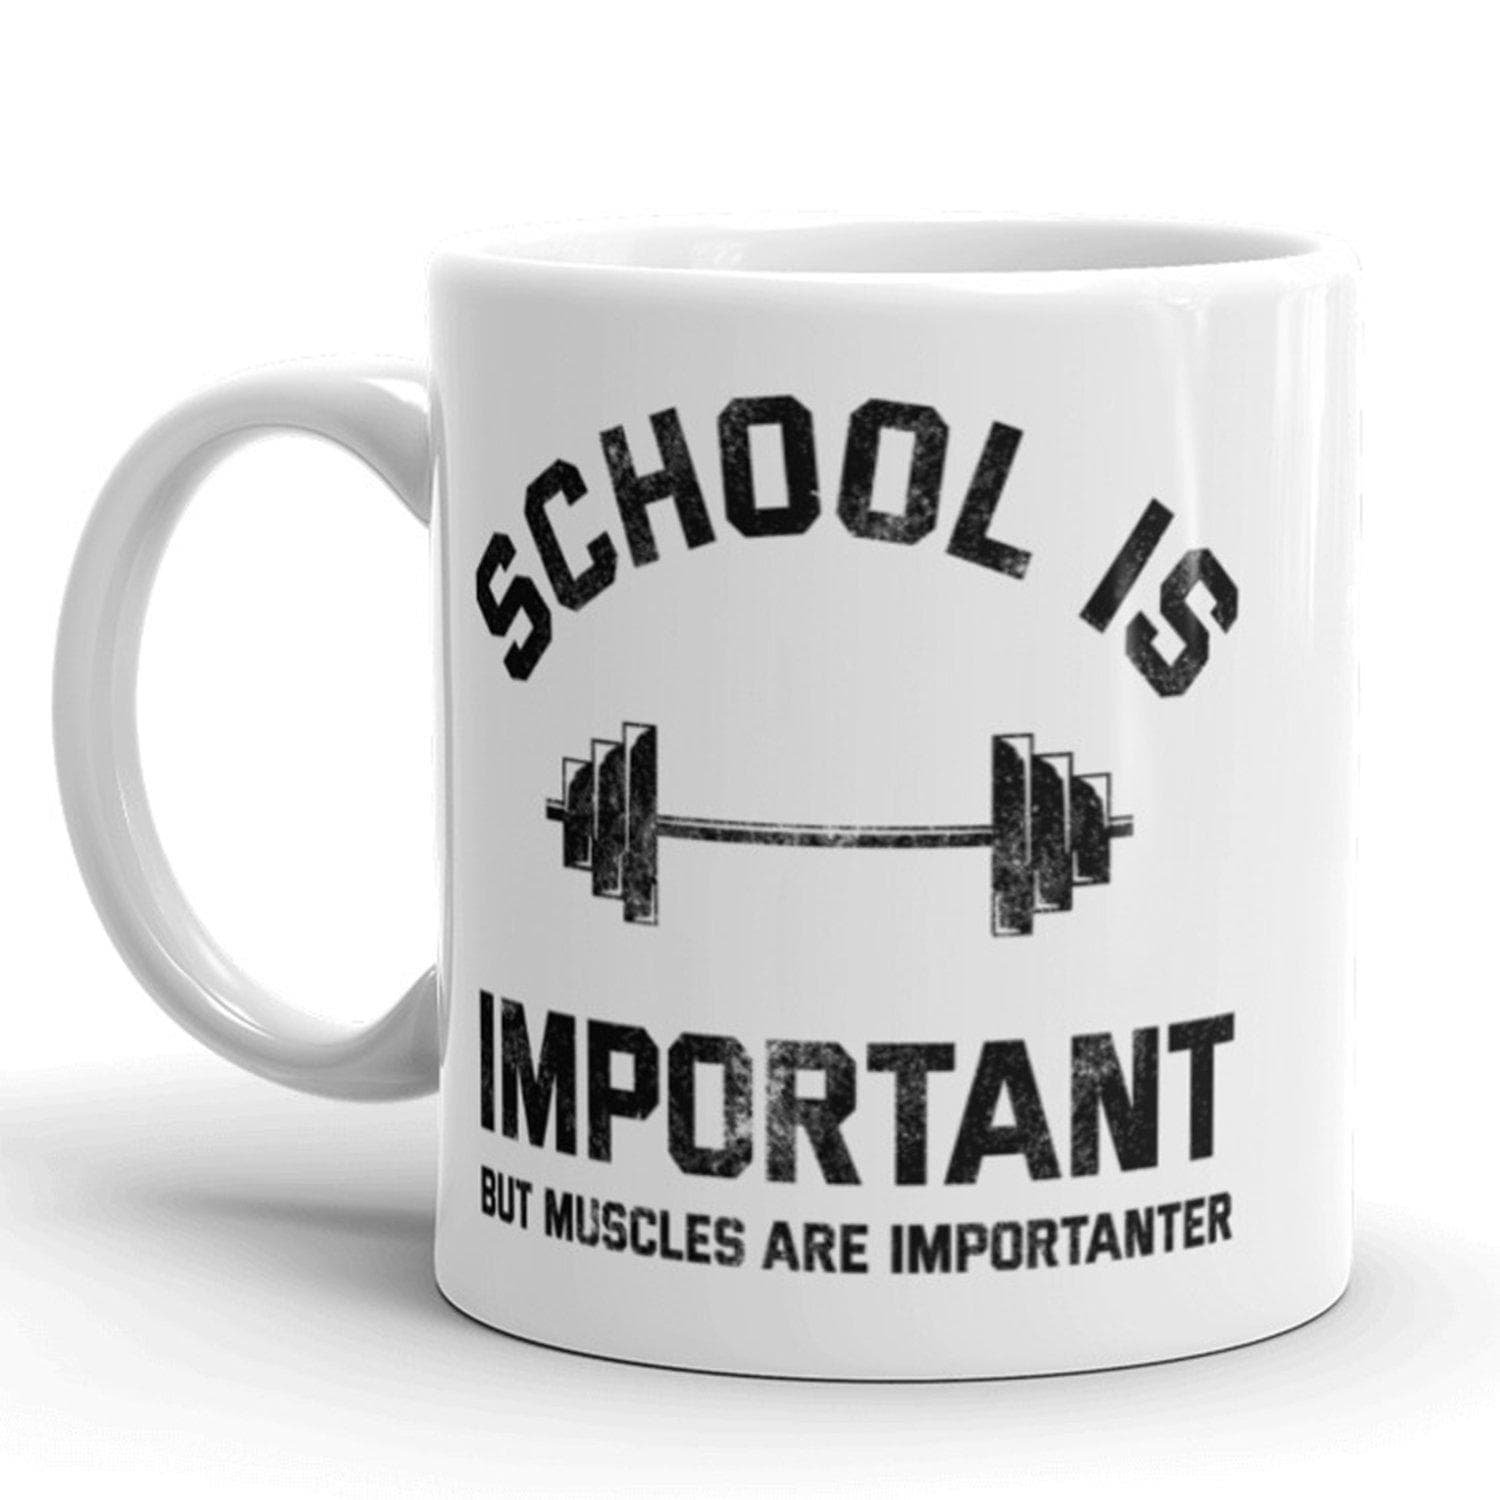 School Is Important But Muscles Are Importanter Mug - Crazy Dog T-Shirts